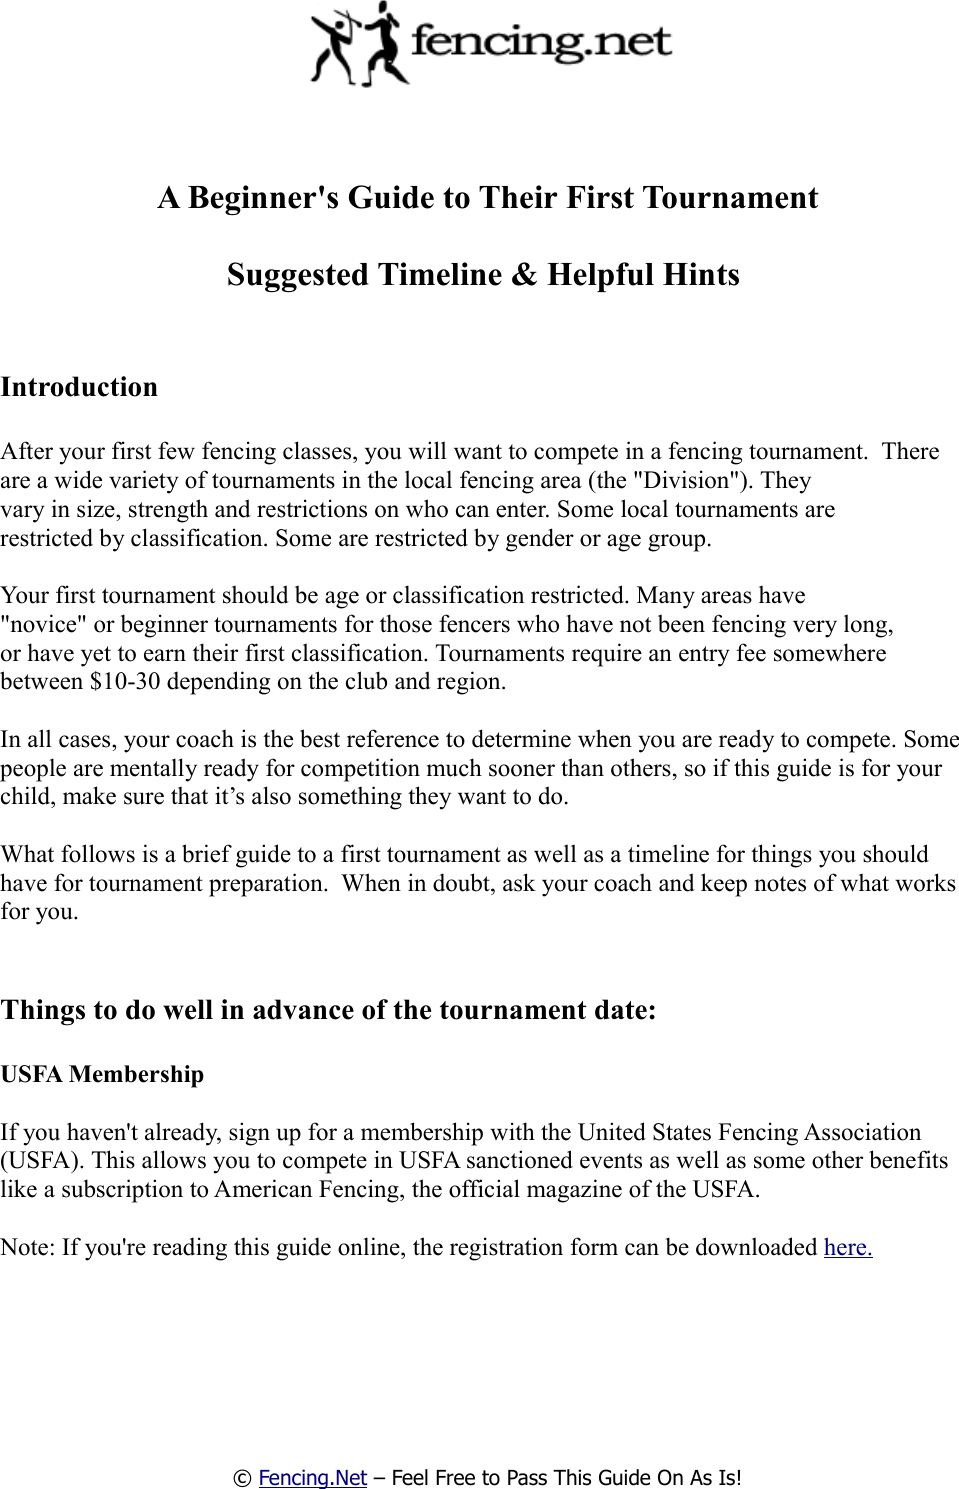 Page 1 of 10 - A Beginner's Guide To Their First Fencing Tournament